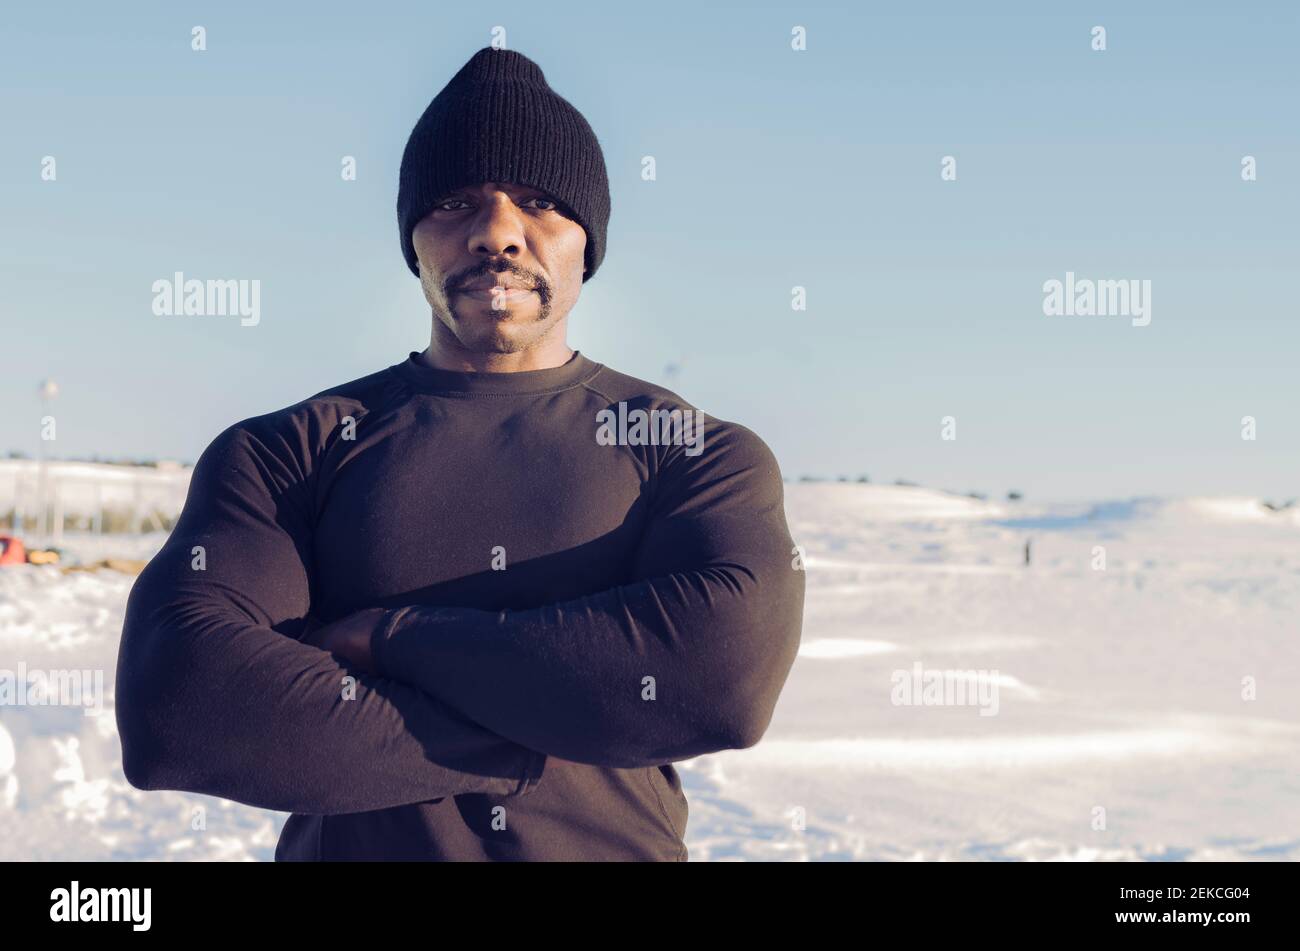 Muscular build sportsman wearing knit hat standing with arms crossed in snow during sunny day Stock Photo